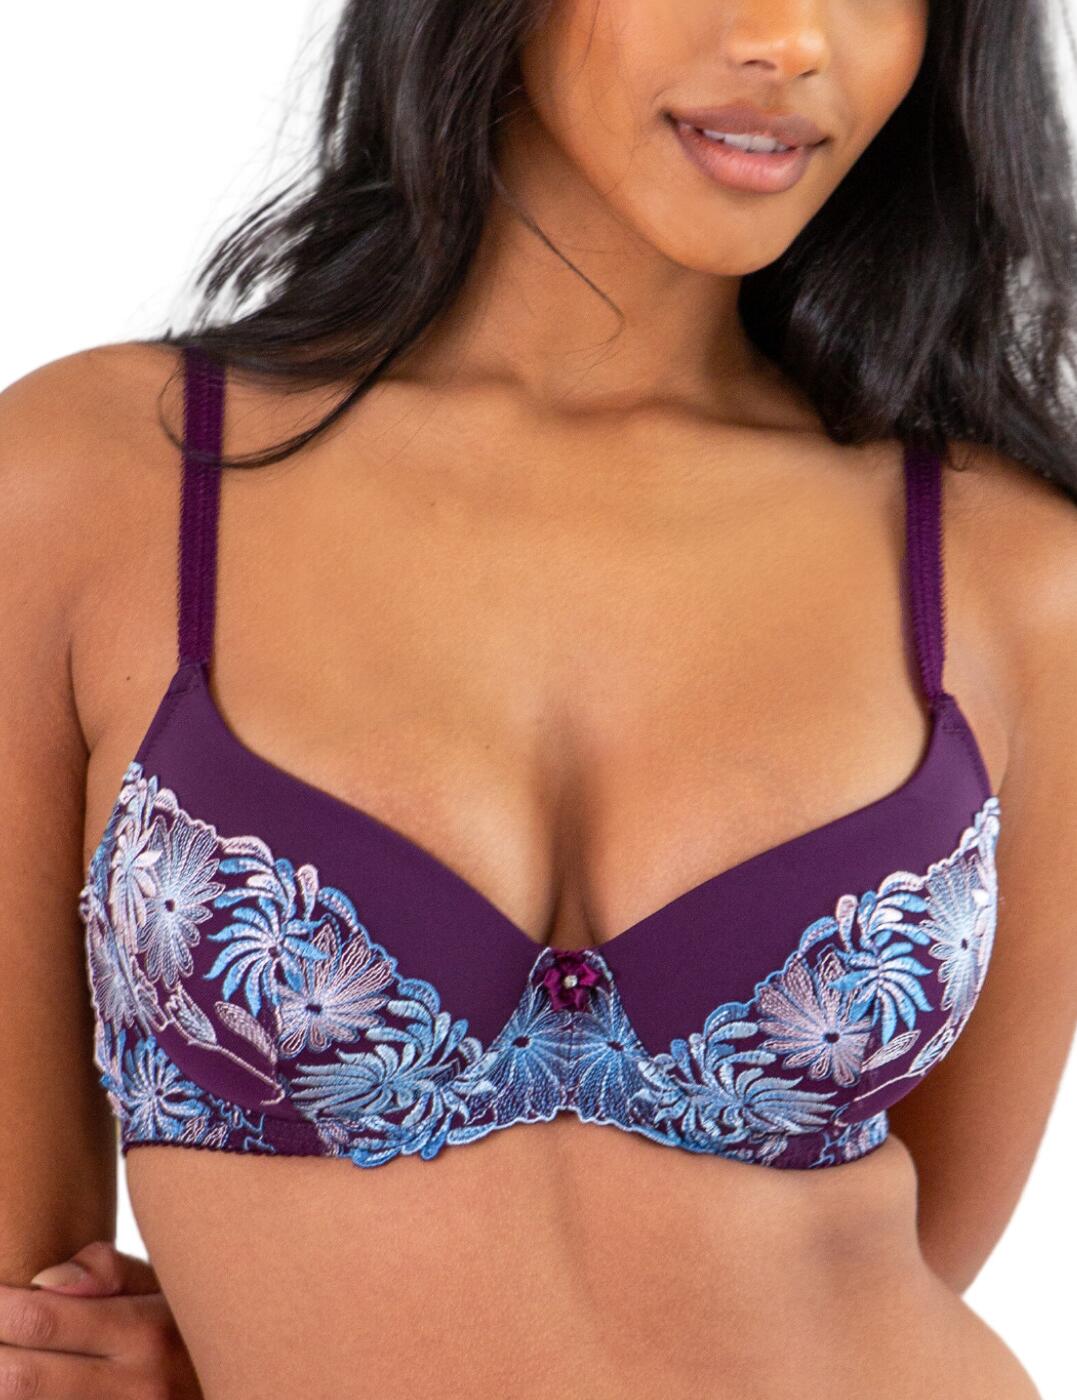 Padded plunge bra - 22 products